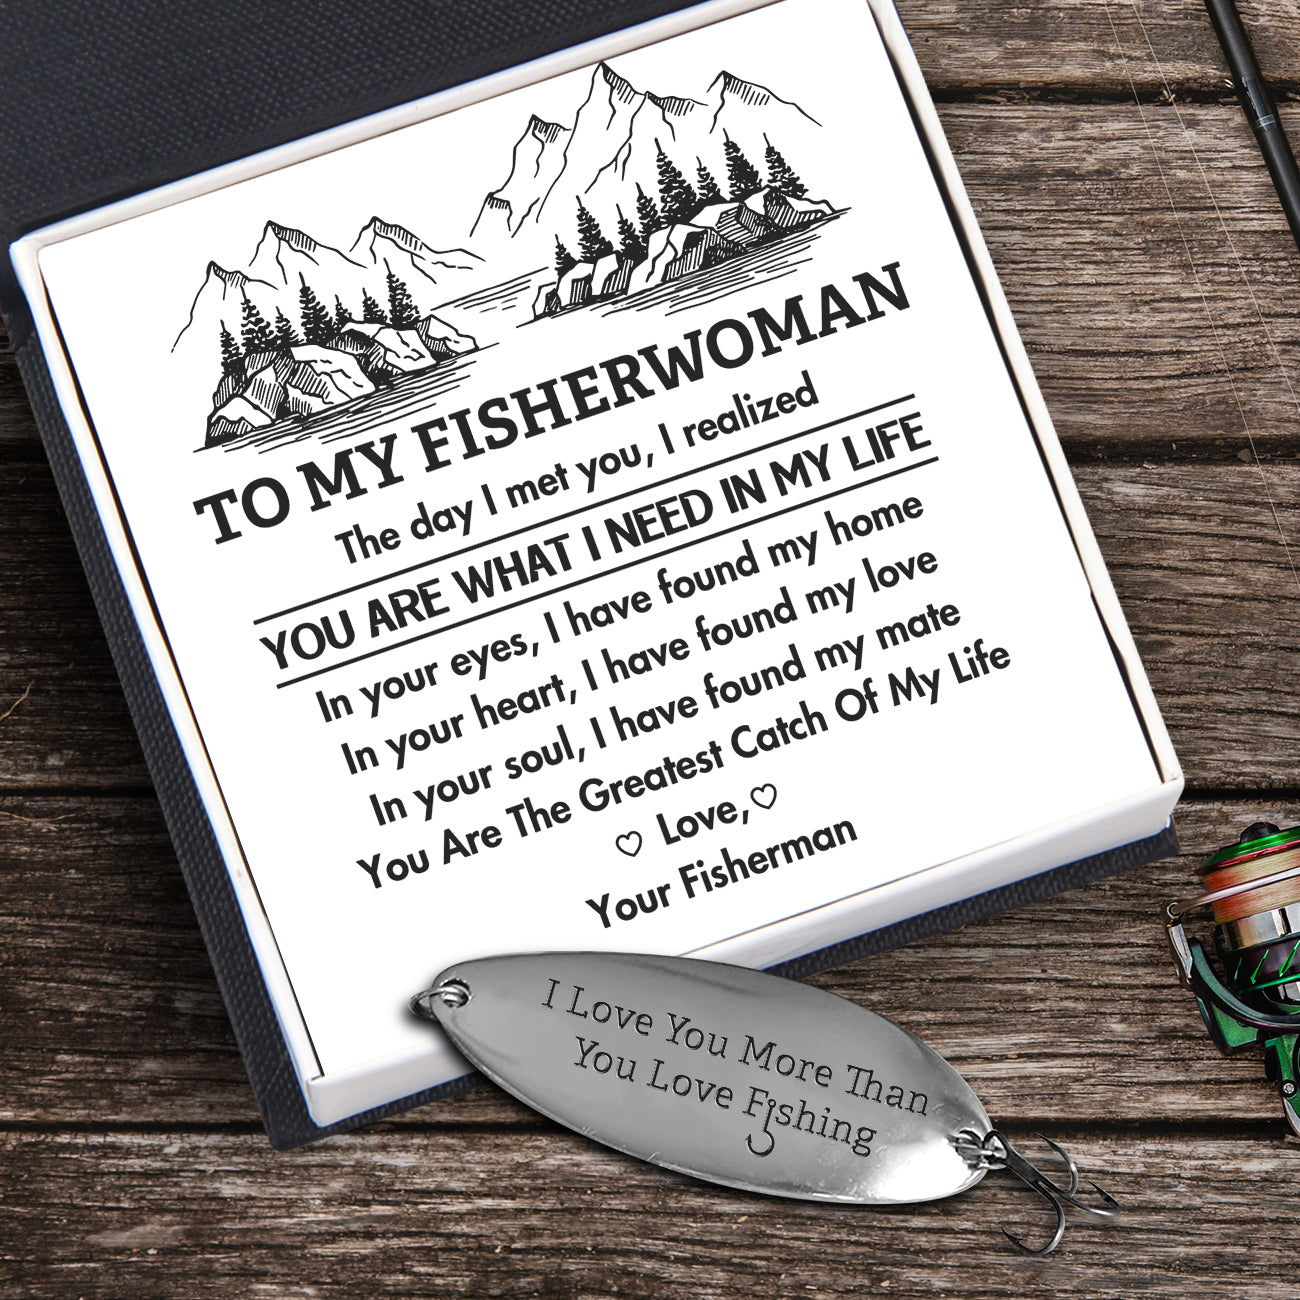 Fishing Lure - Fishing - To My Fisherwoman - You Are The Greatest Catch Of My Life - Ukgfb13001